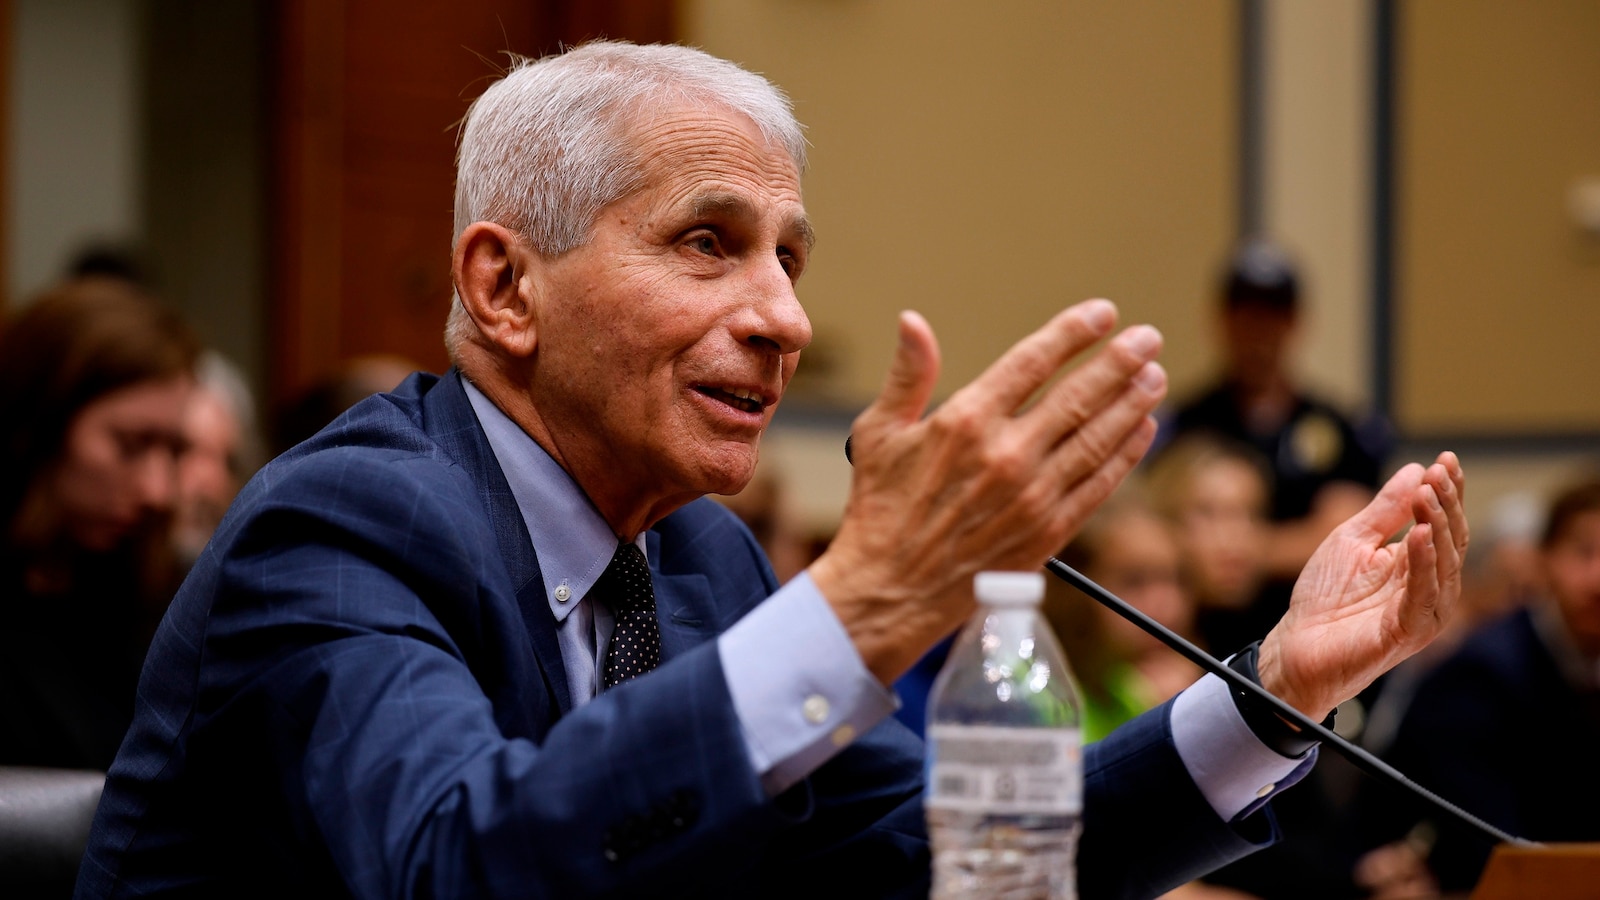 Reasons why Fauci did not resign during the Trump administration